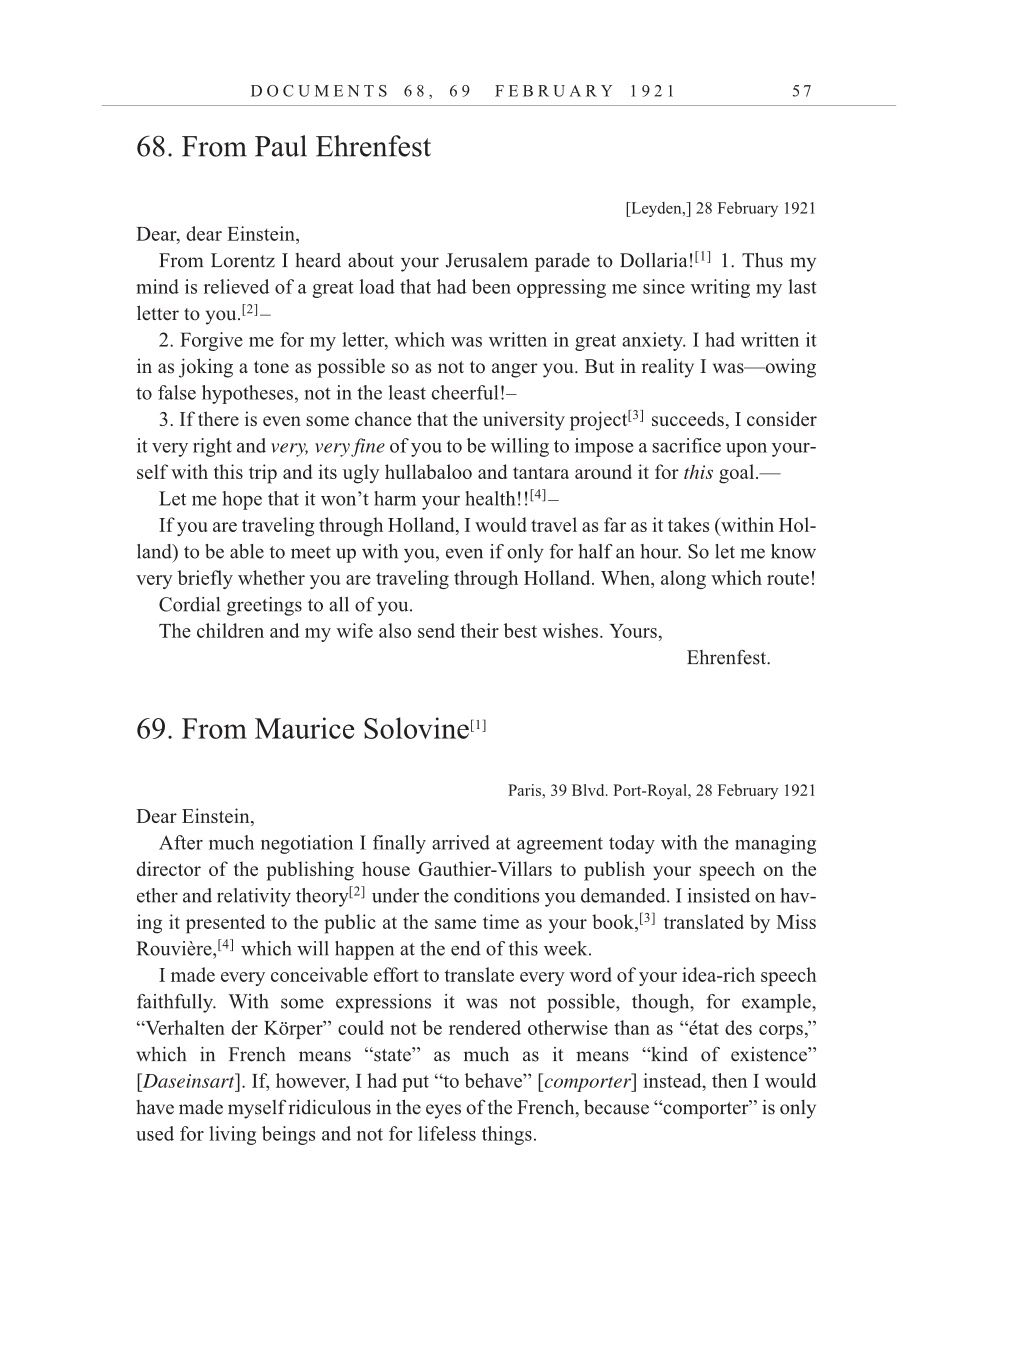 Volume 12: The Berlin Years: Correspondence, January-December 1921 (English translation supplement) page 57